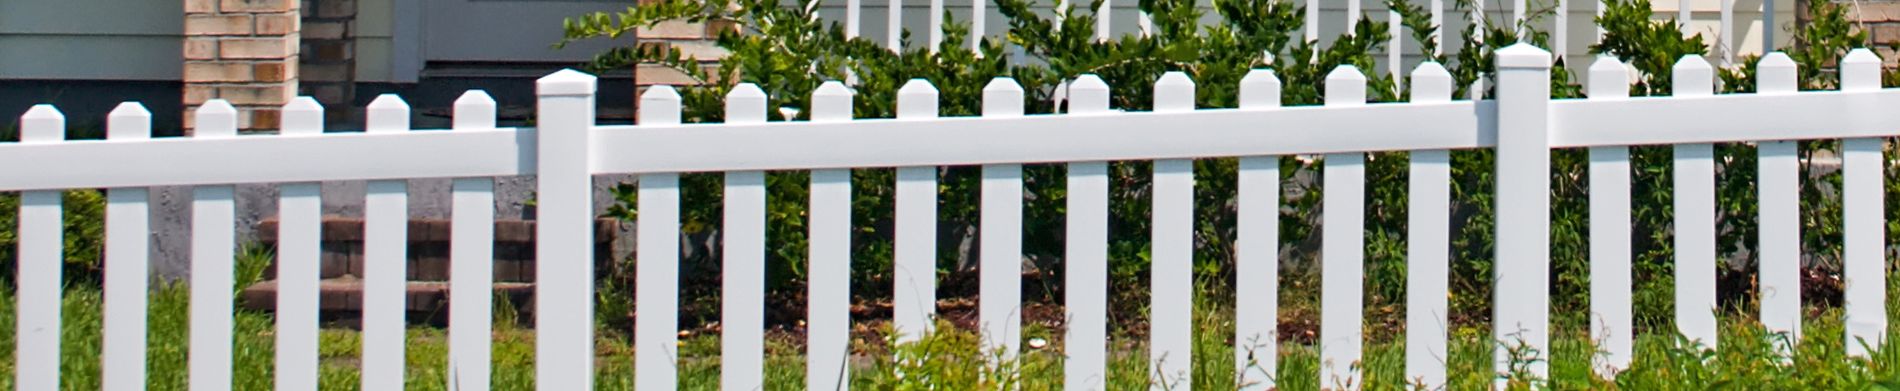 Why is Vinyl Fence a Good Investment Option for Property Owners?